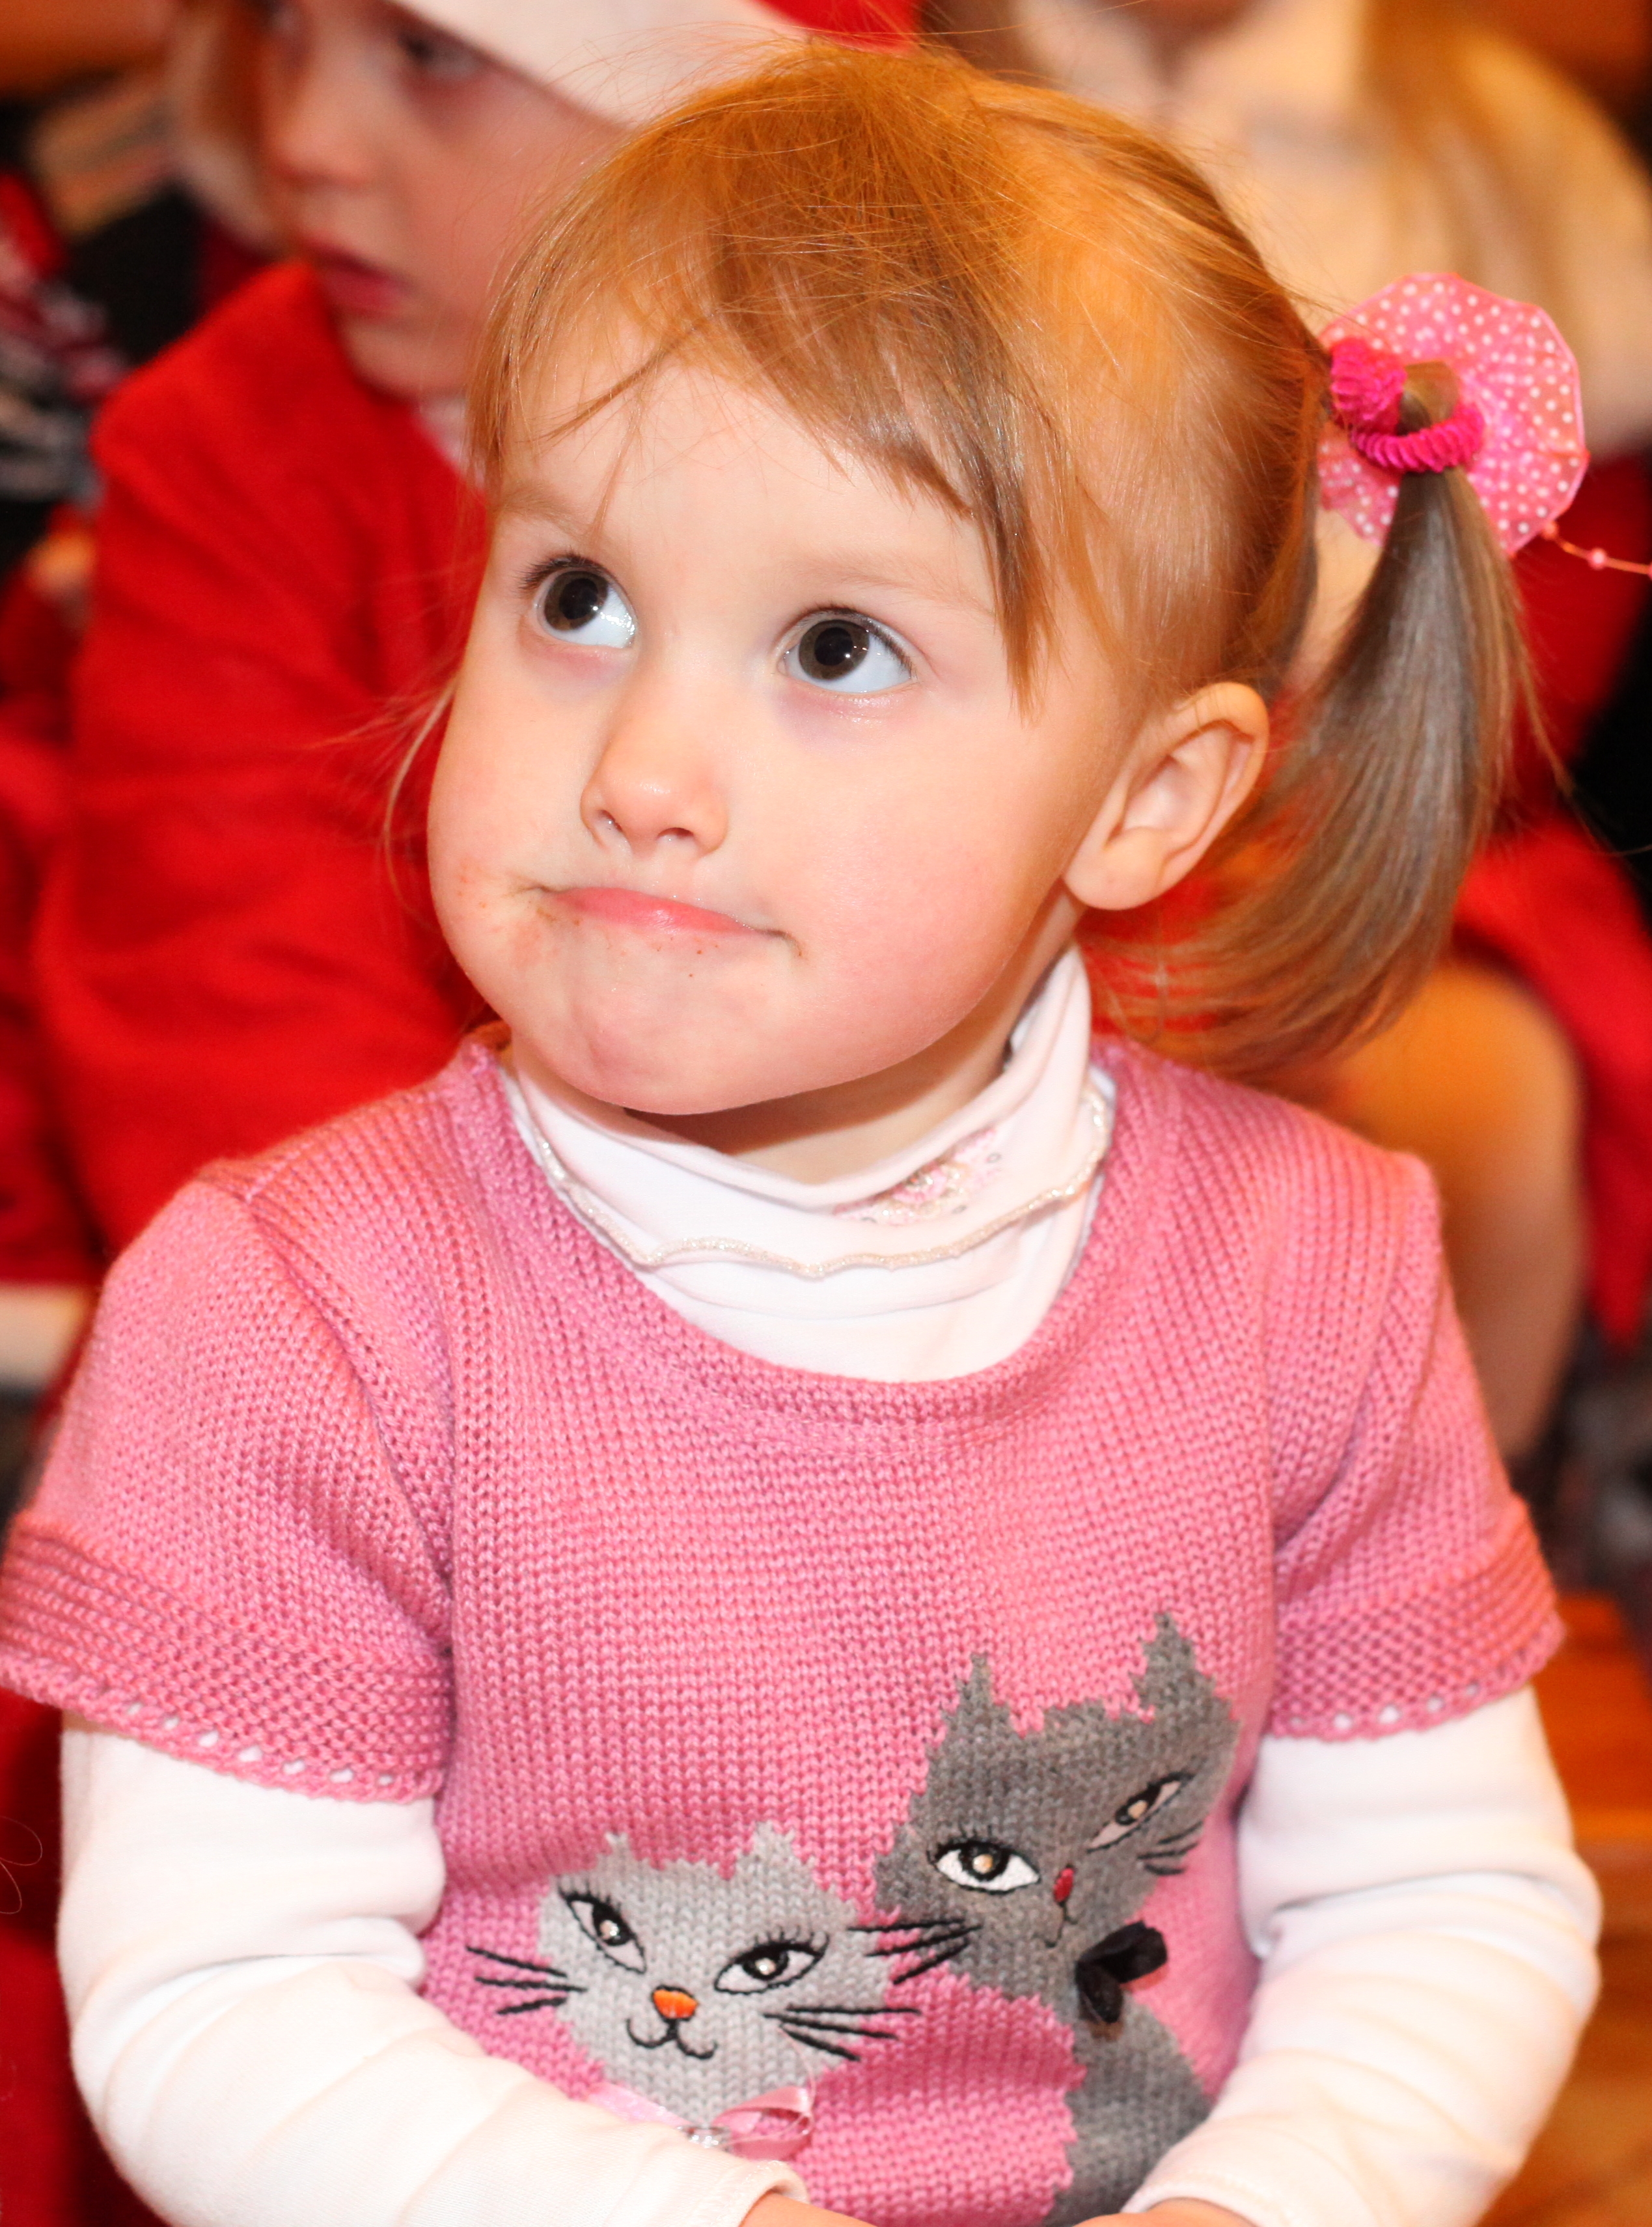 a cute Catholic baby girl at st Nicholas day celebration in a Catholic kindergarten, picture 6